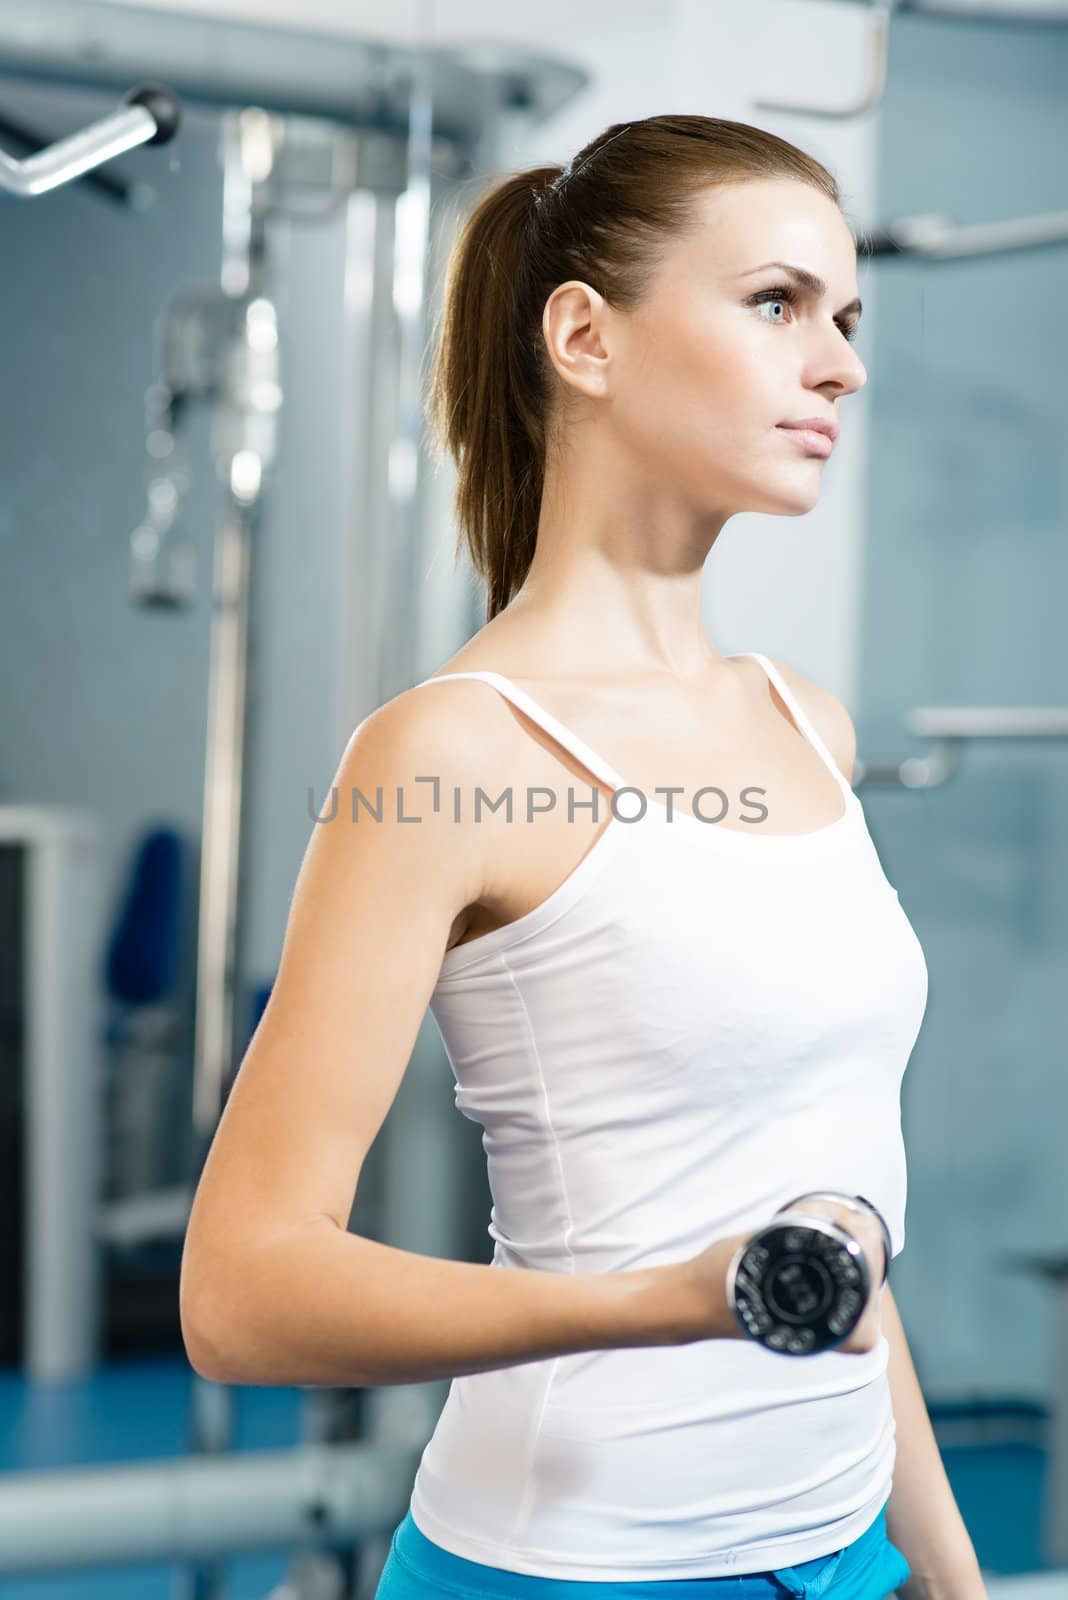 female athlete dumbbell, exercise in the fitness club